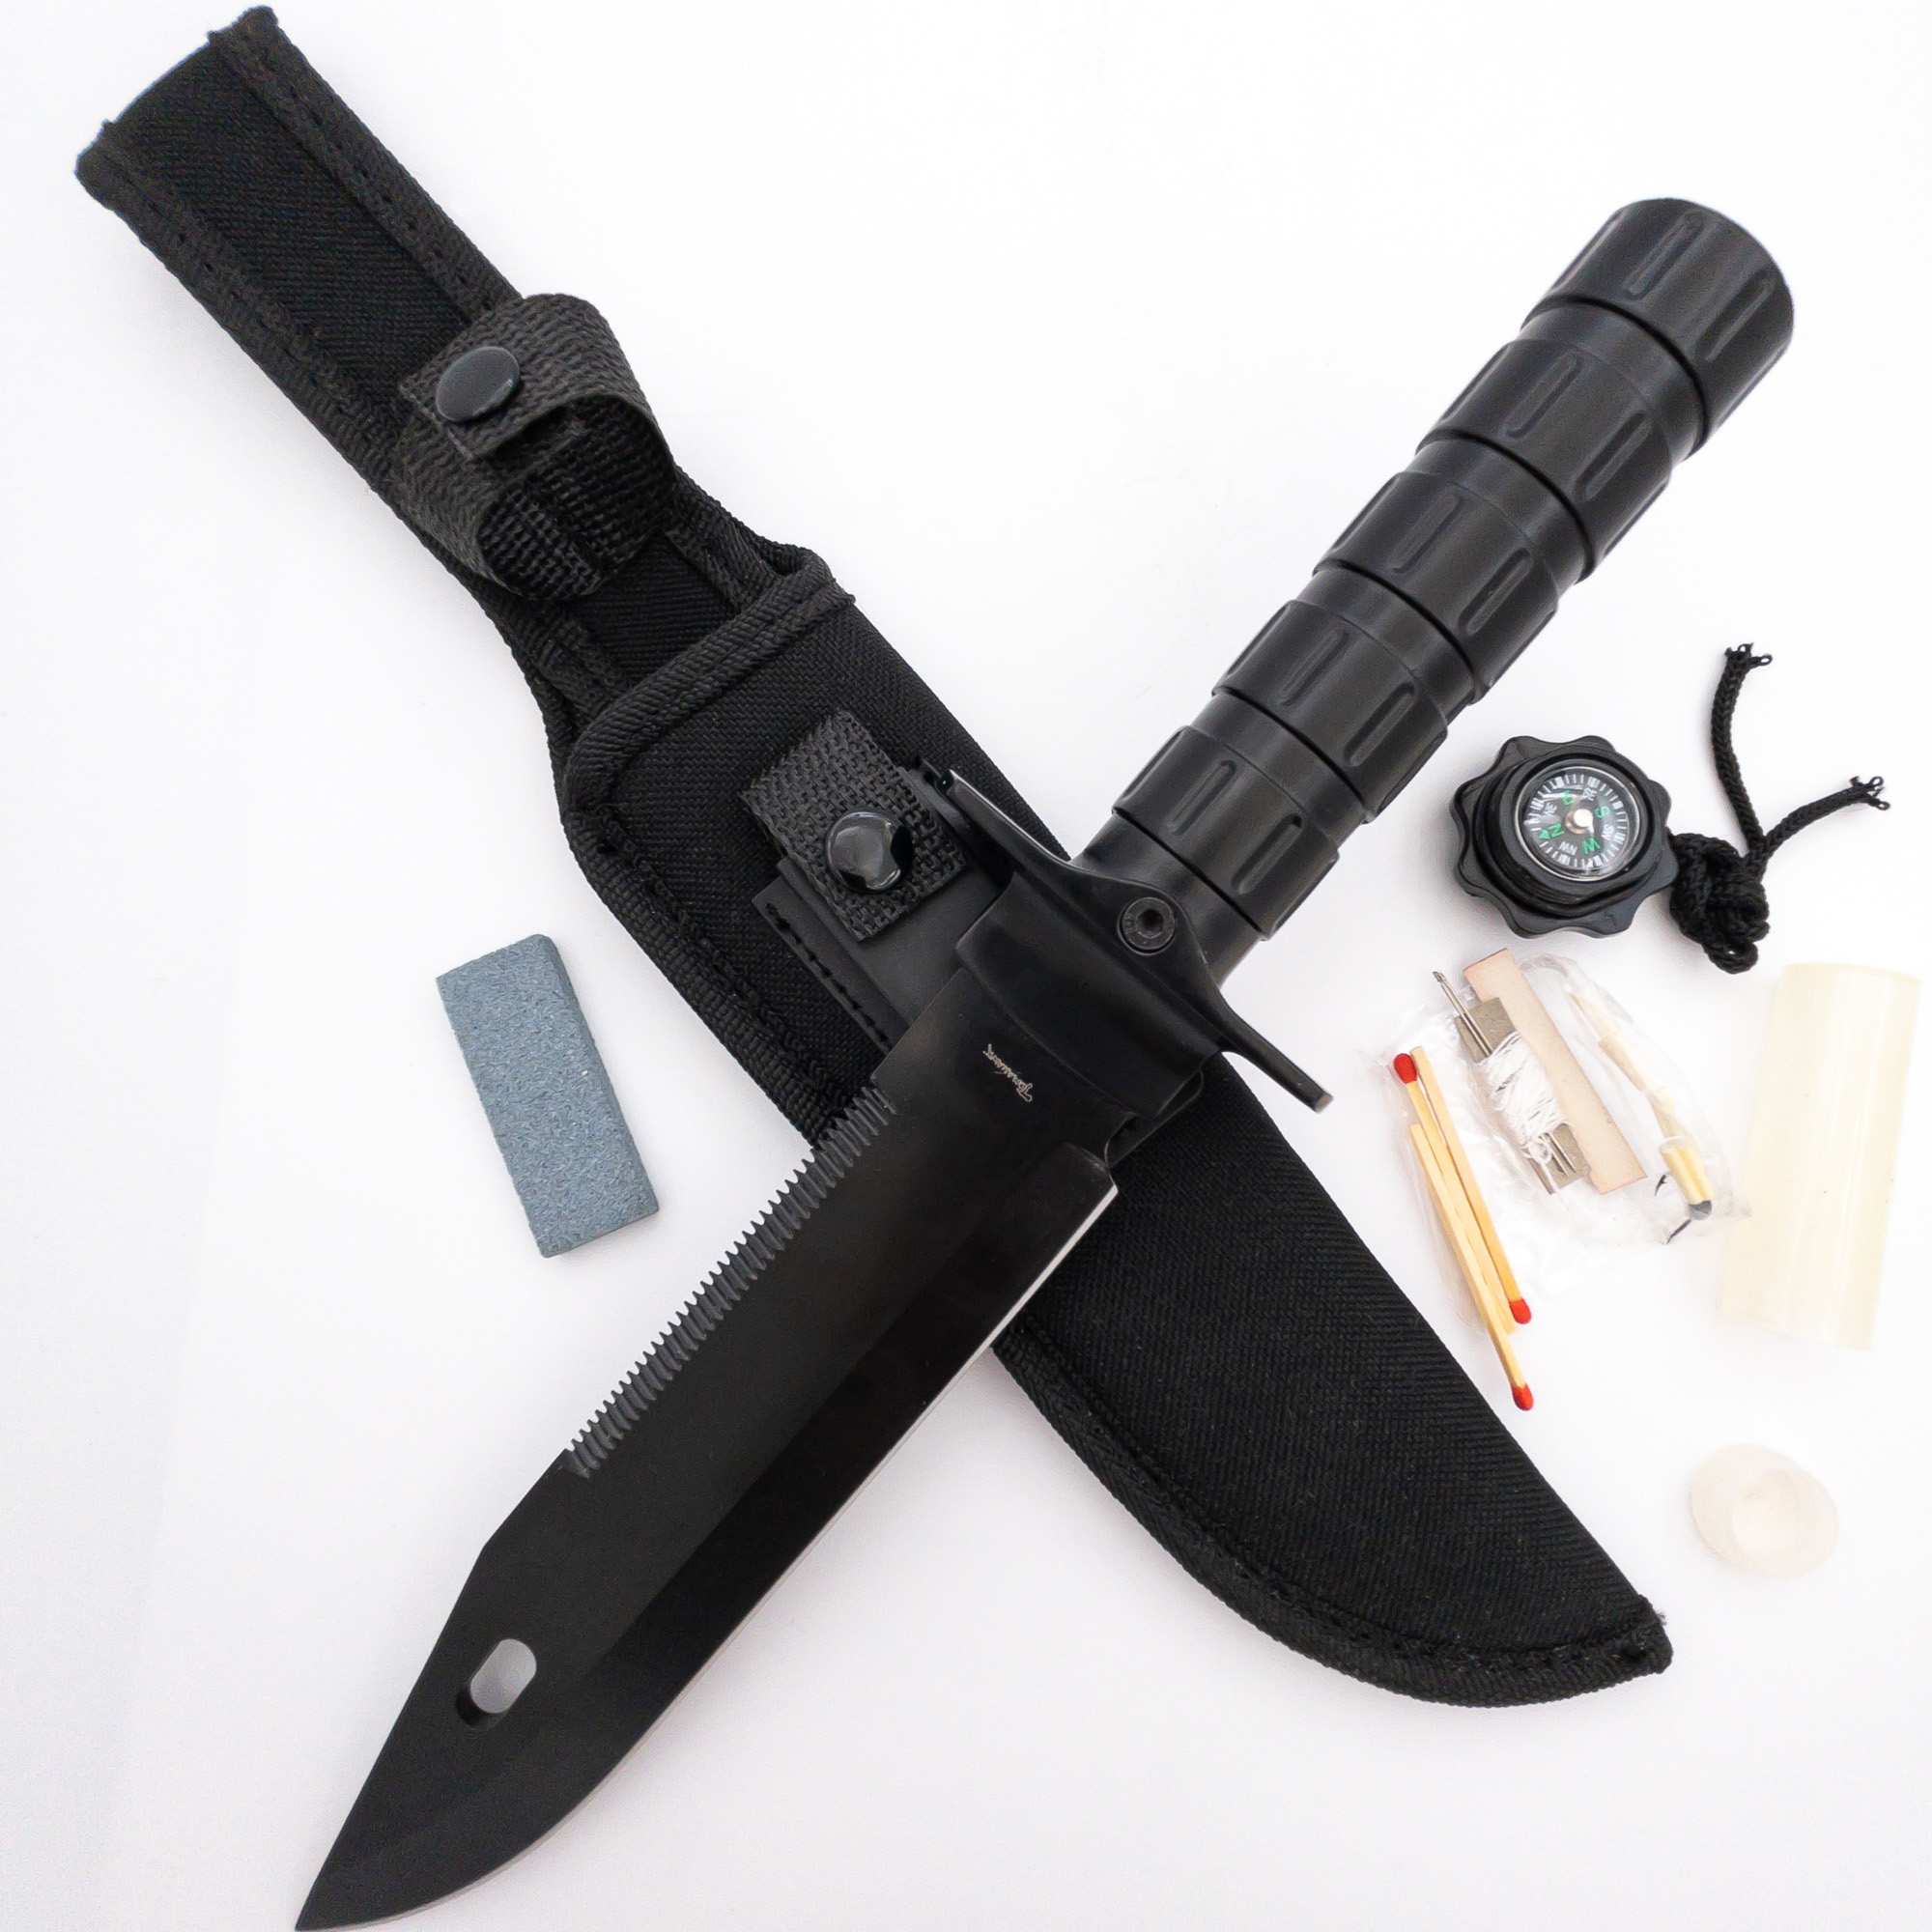 Happily Lost SURVIVAL Compartment KNIFE with Heavy Duty Sheath